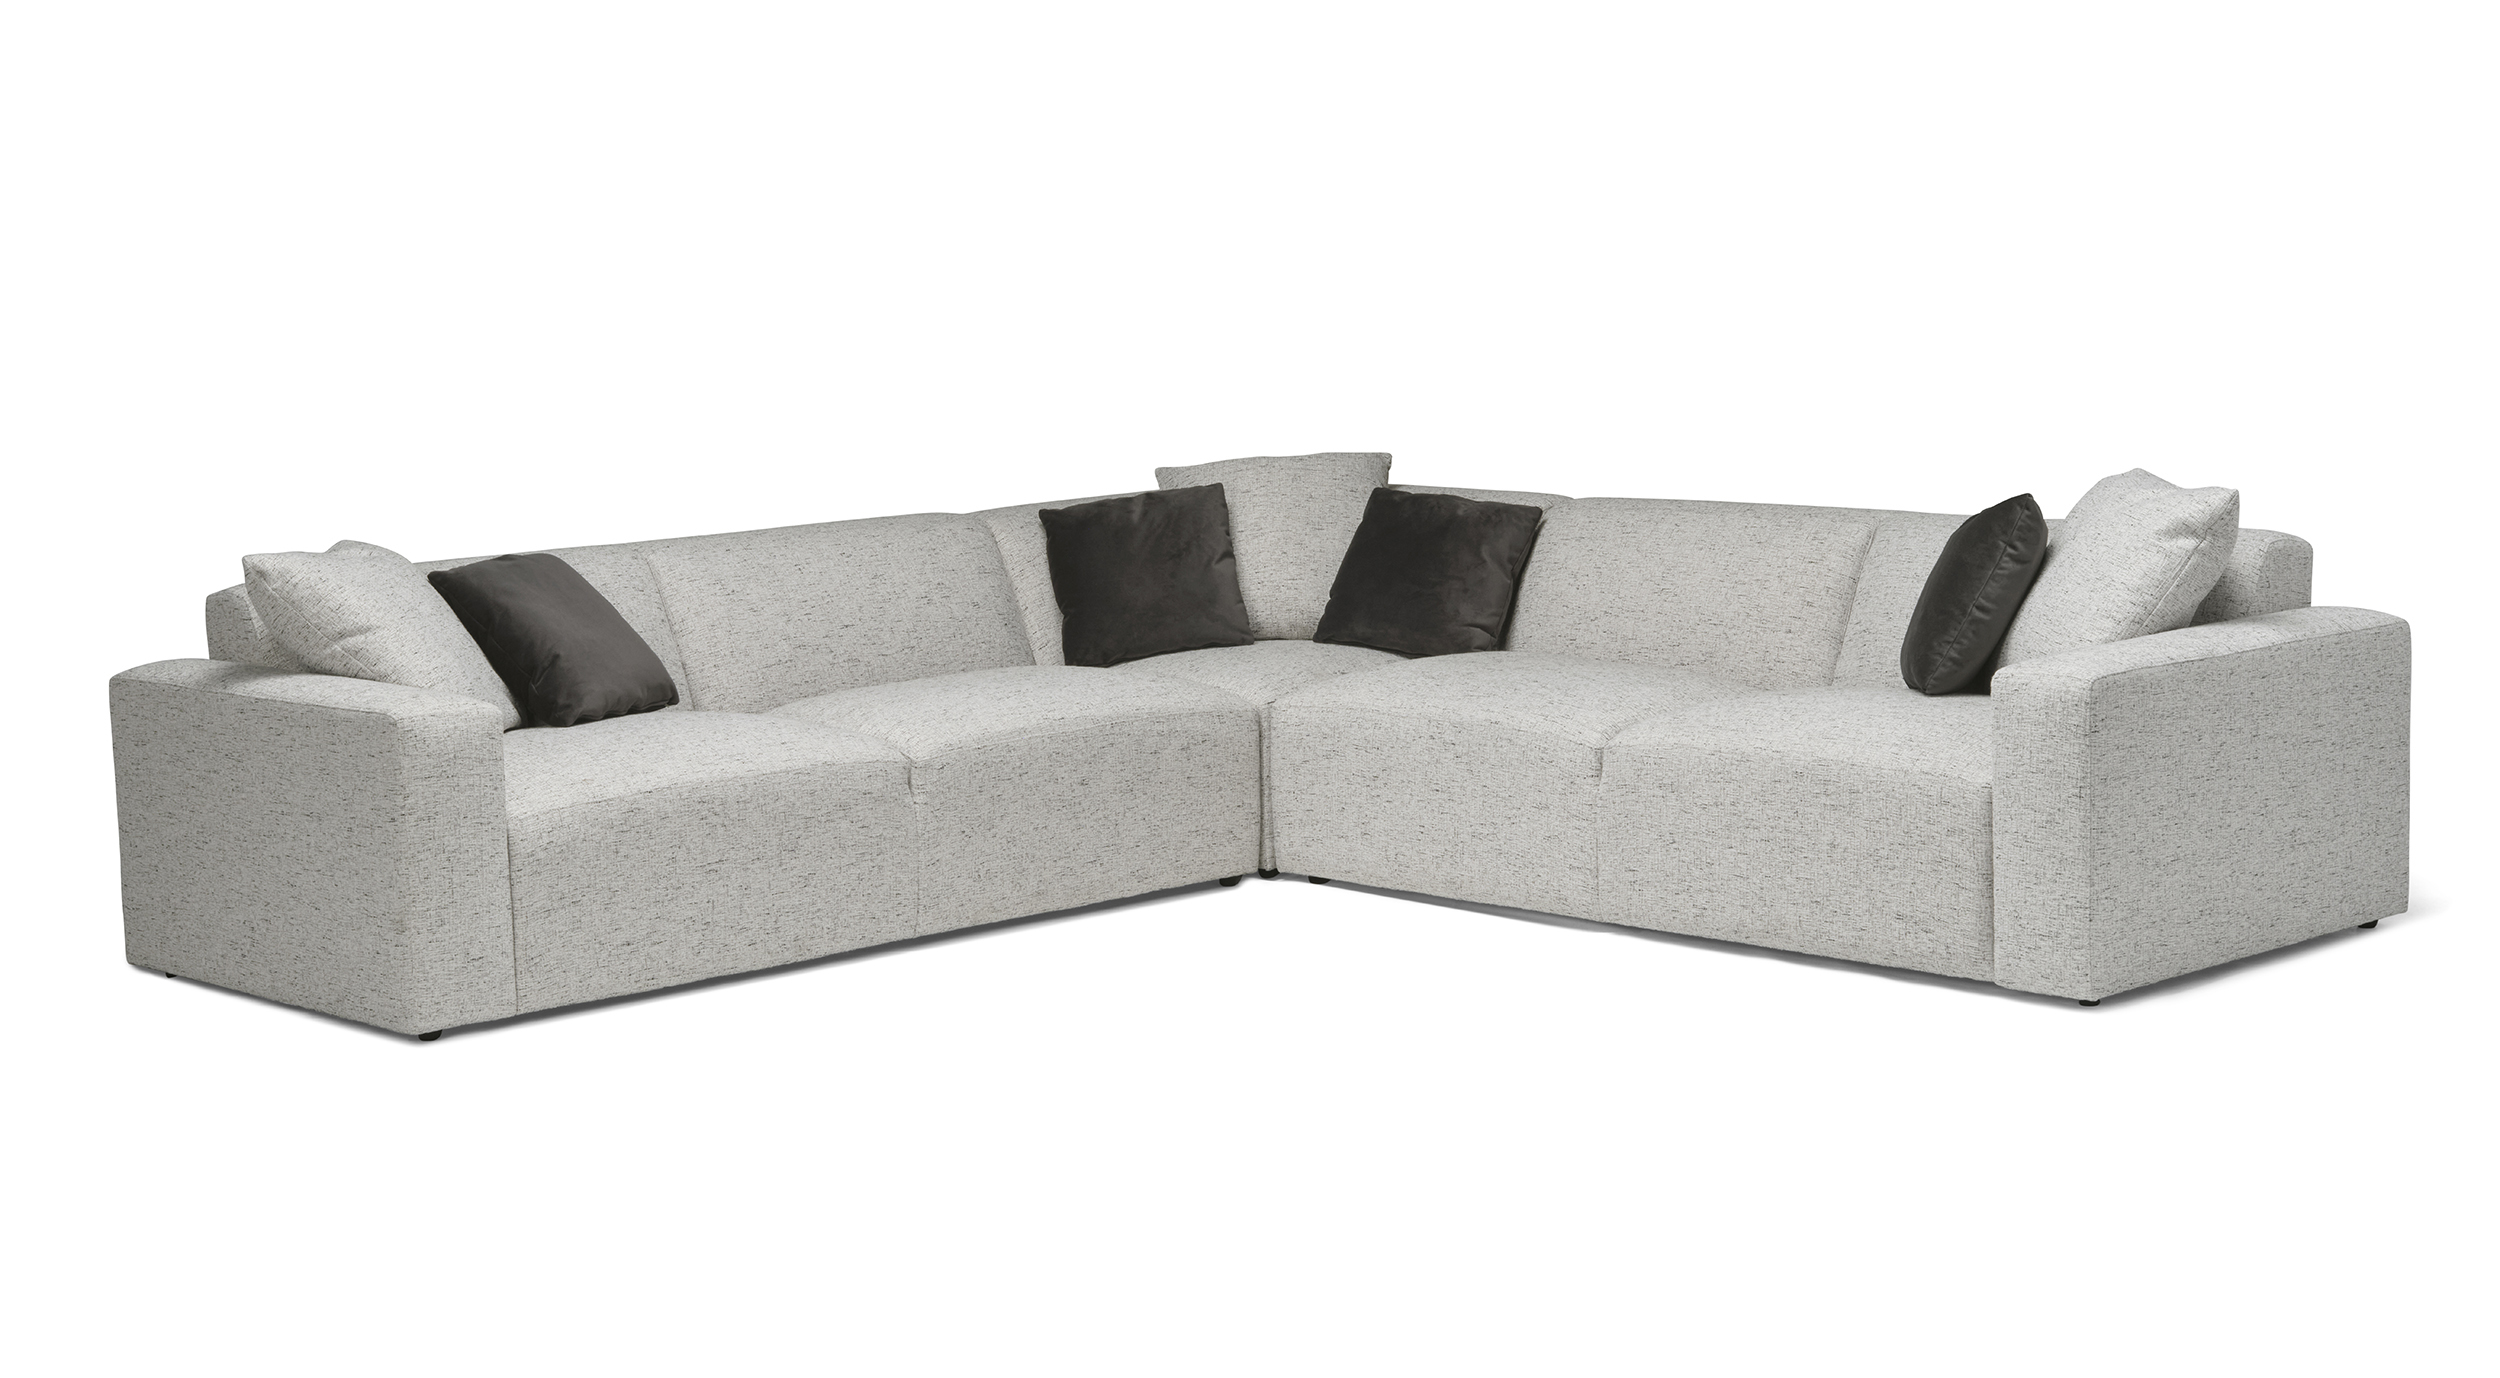 Grey pearl sectional sofa with five half seats is made in Canada